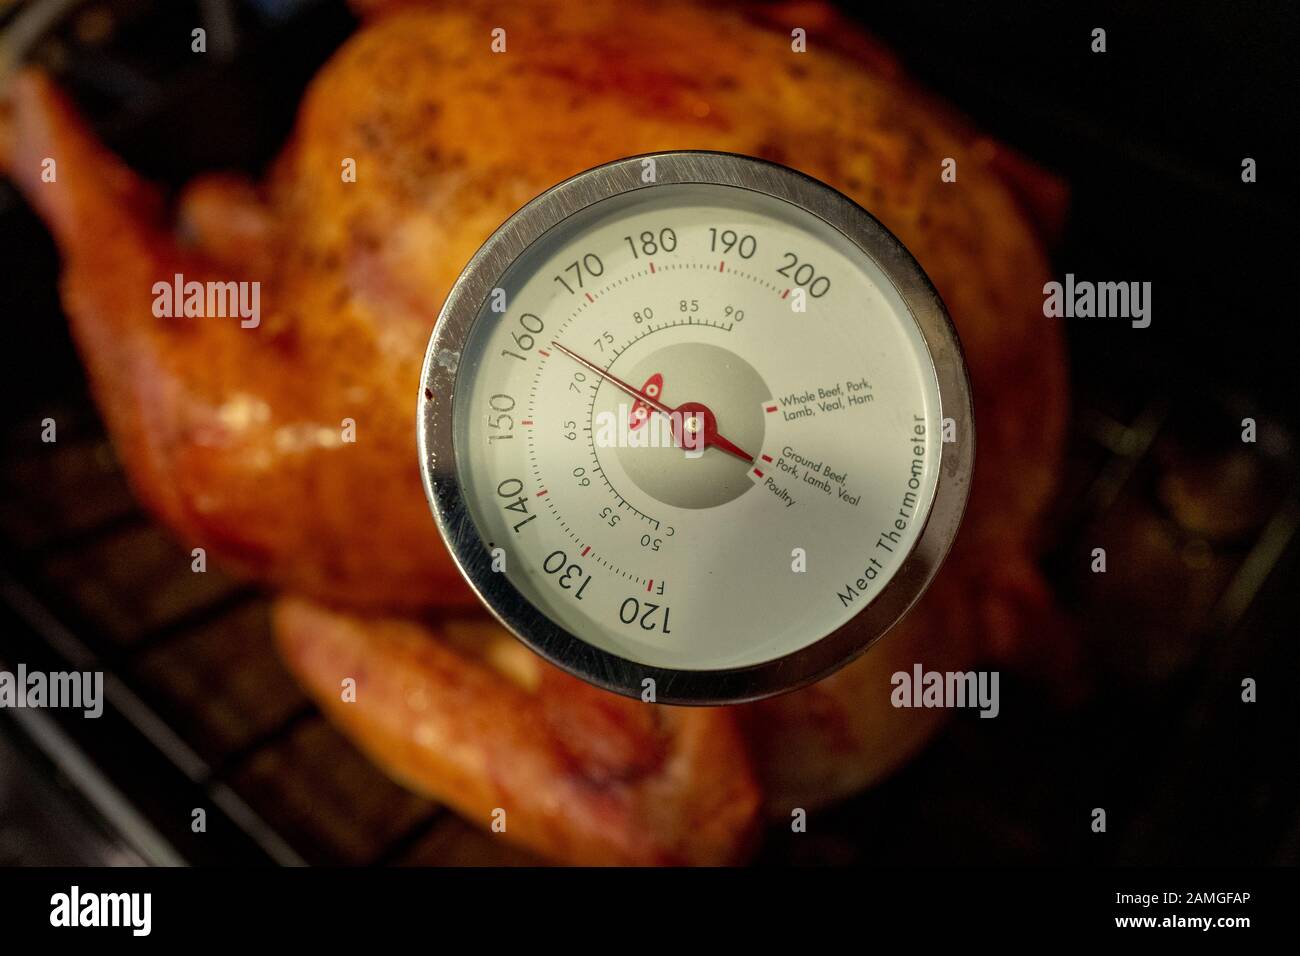 https://c8.alamy.com/comp/2AMGFAP/close-up-of-meat-thermometer-in-cooked-turkey-showing-safe-internal-temperature-for-poultry-during-the-preparation-of-a-traditional-american-thanksgiving-holiday-meal-san-ramon-california-november-23-2019-2AMGFAP.jpg